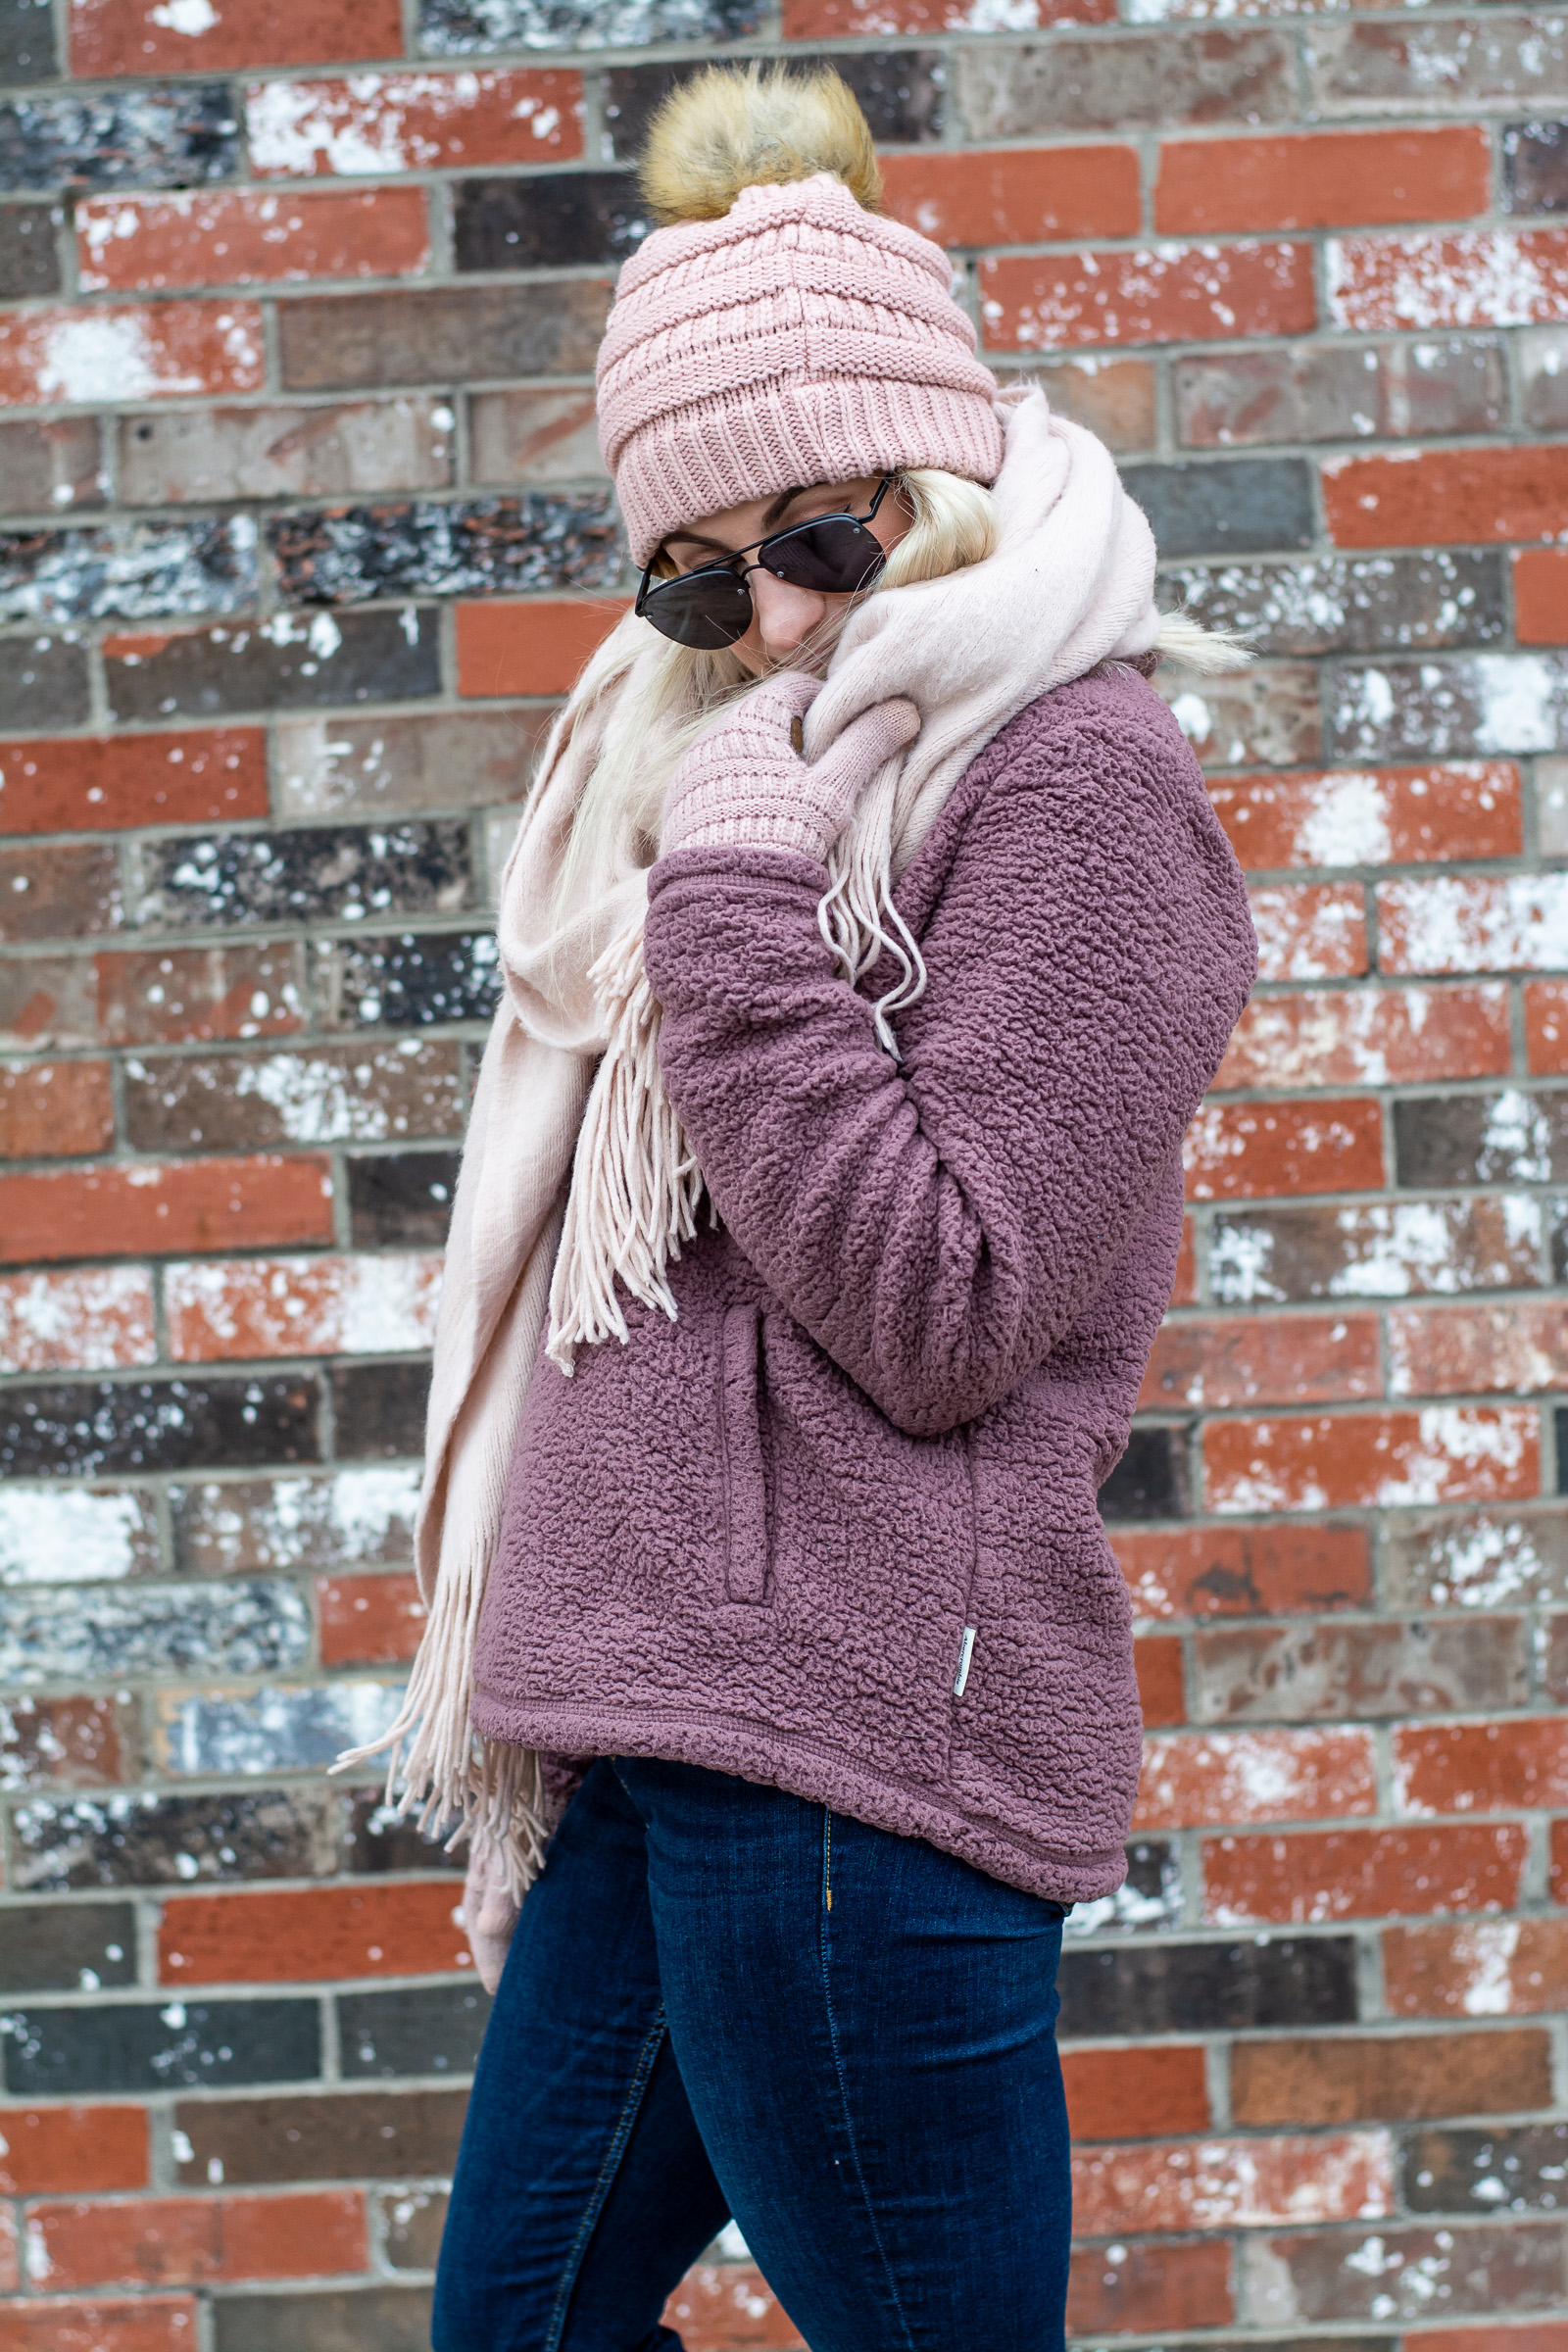 Cozy Sherpa + Winter Boots. | Ashley from LSR